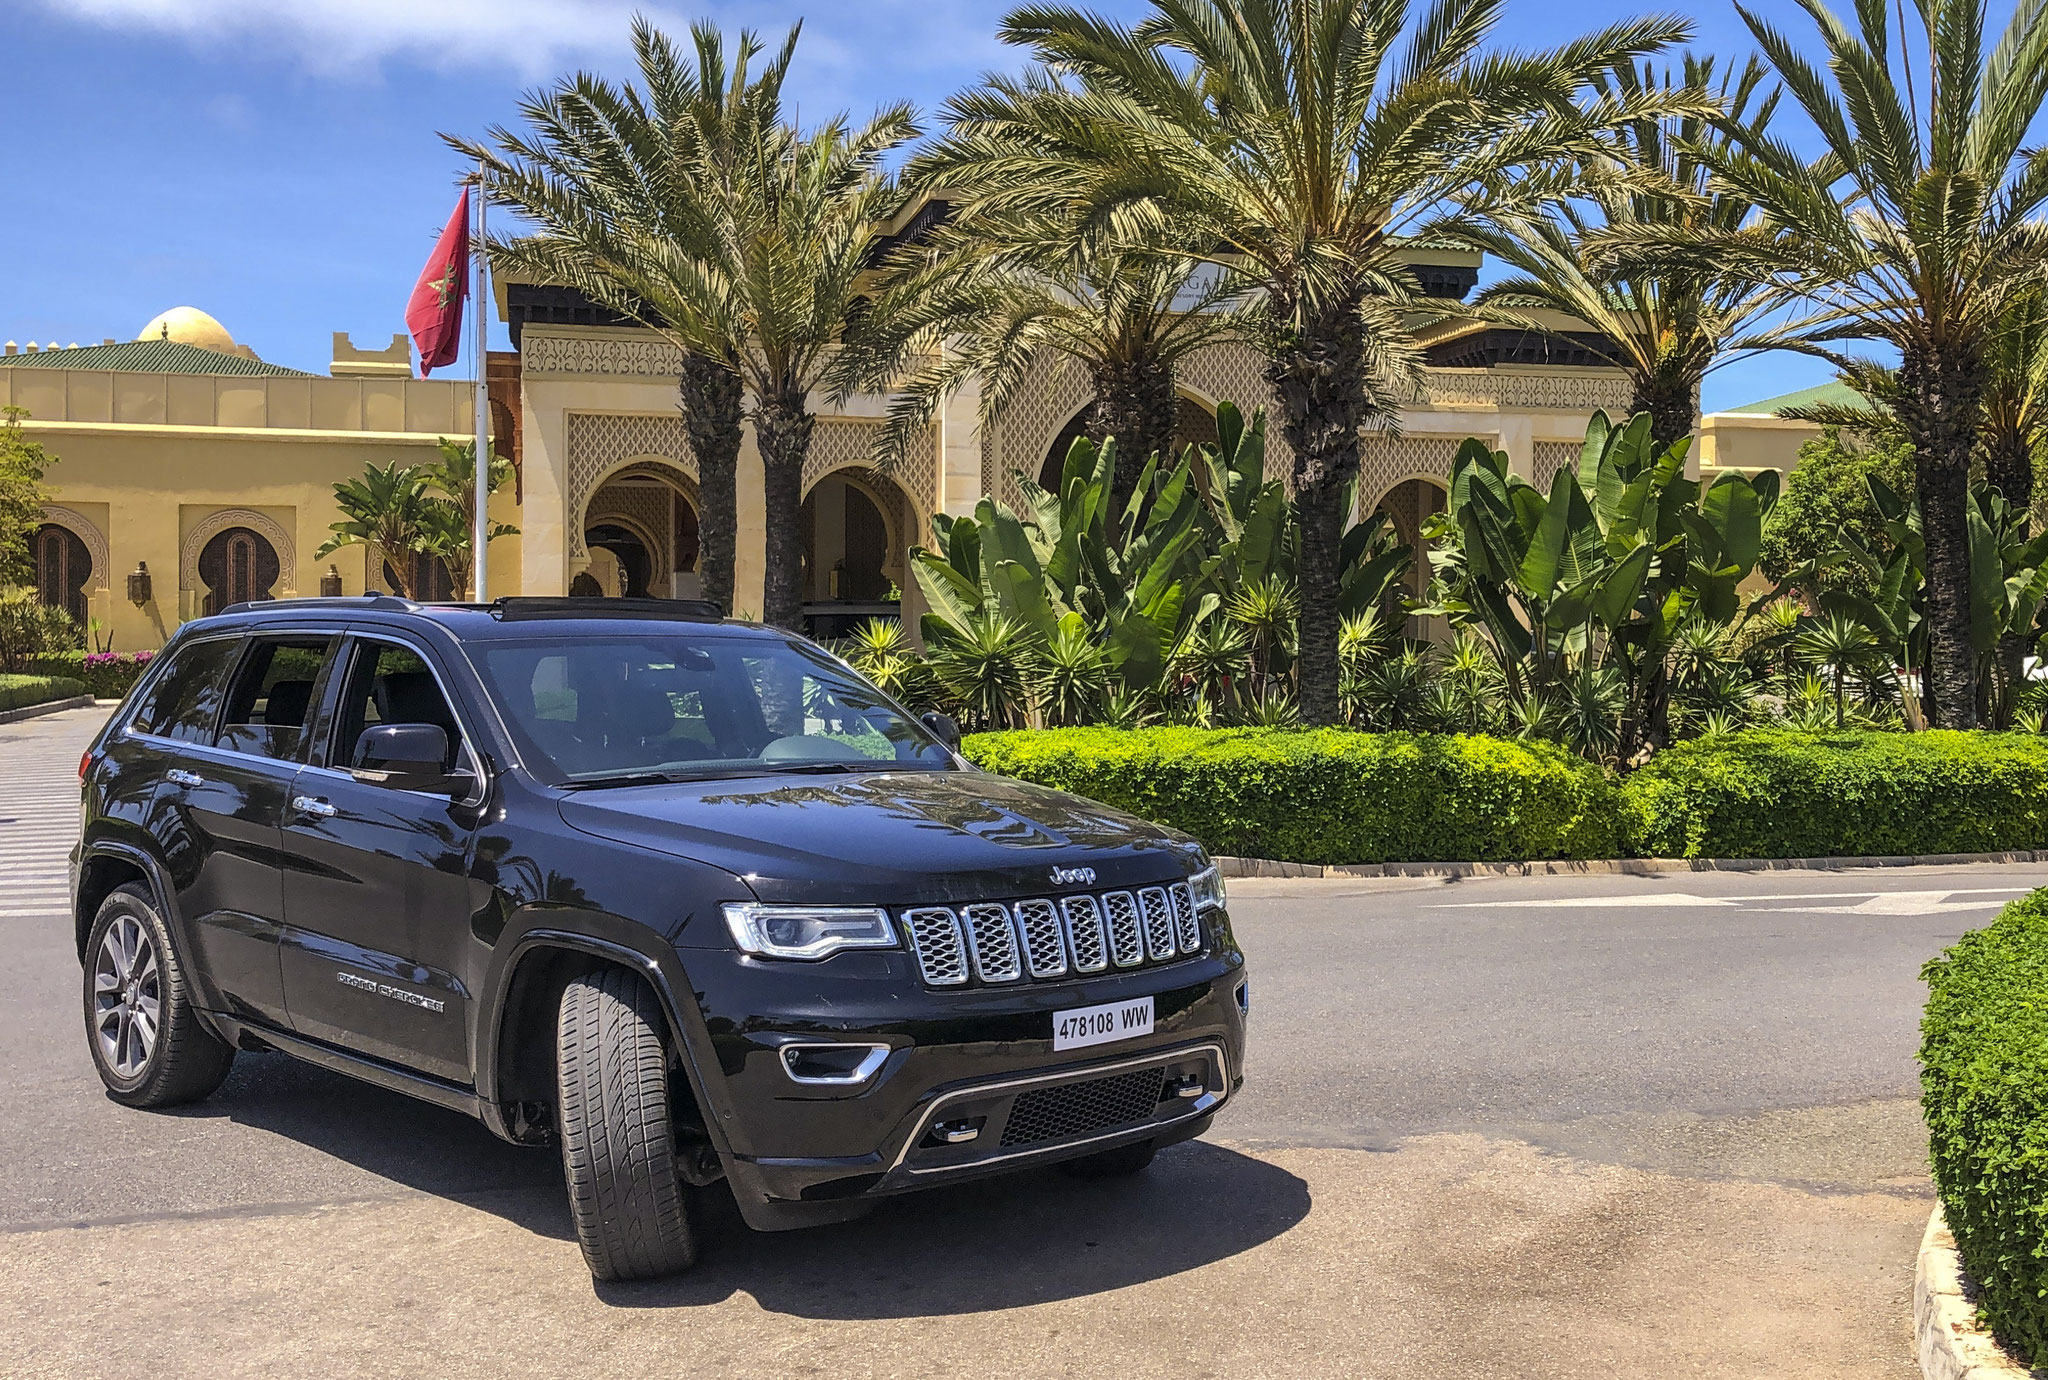 Our Brand new Jeep Grand Cherokee